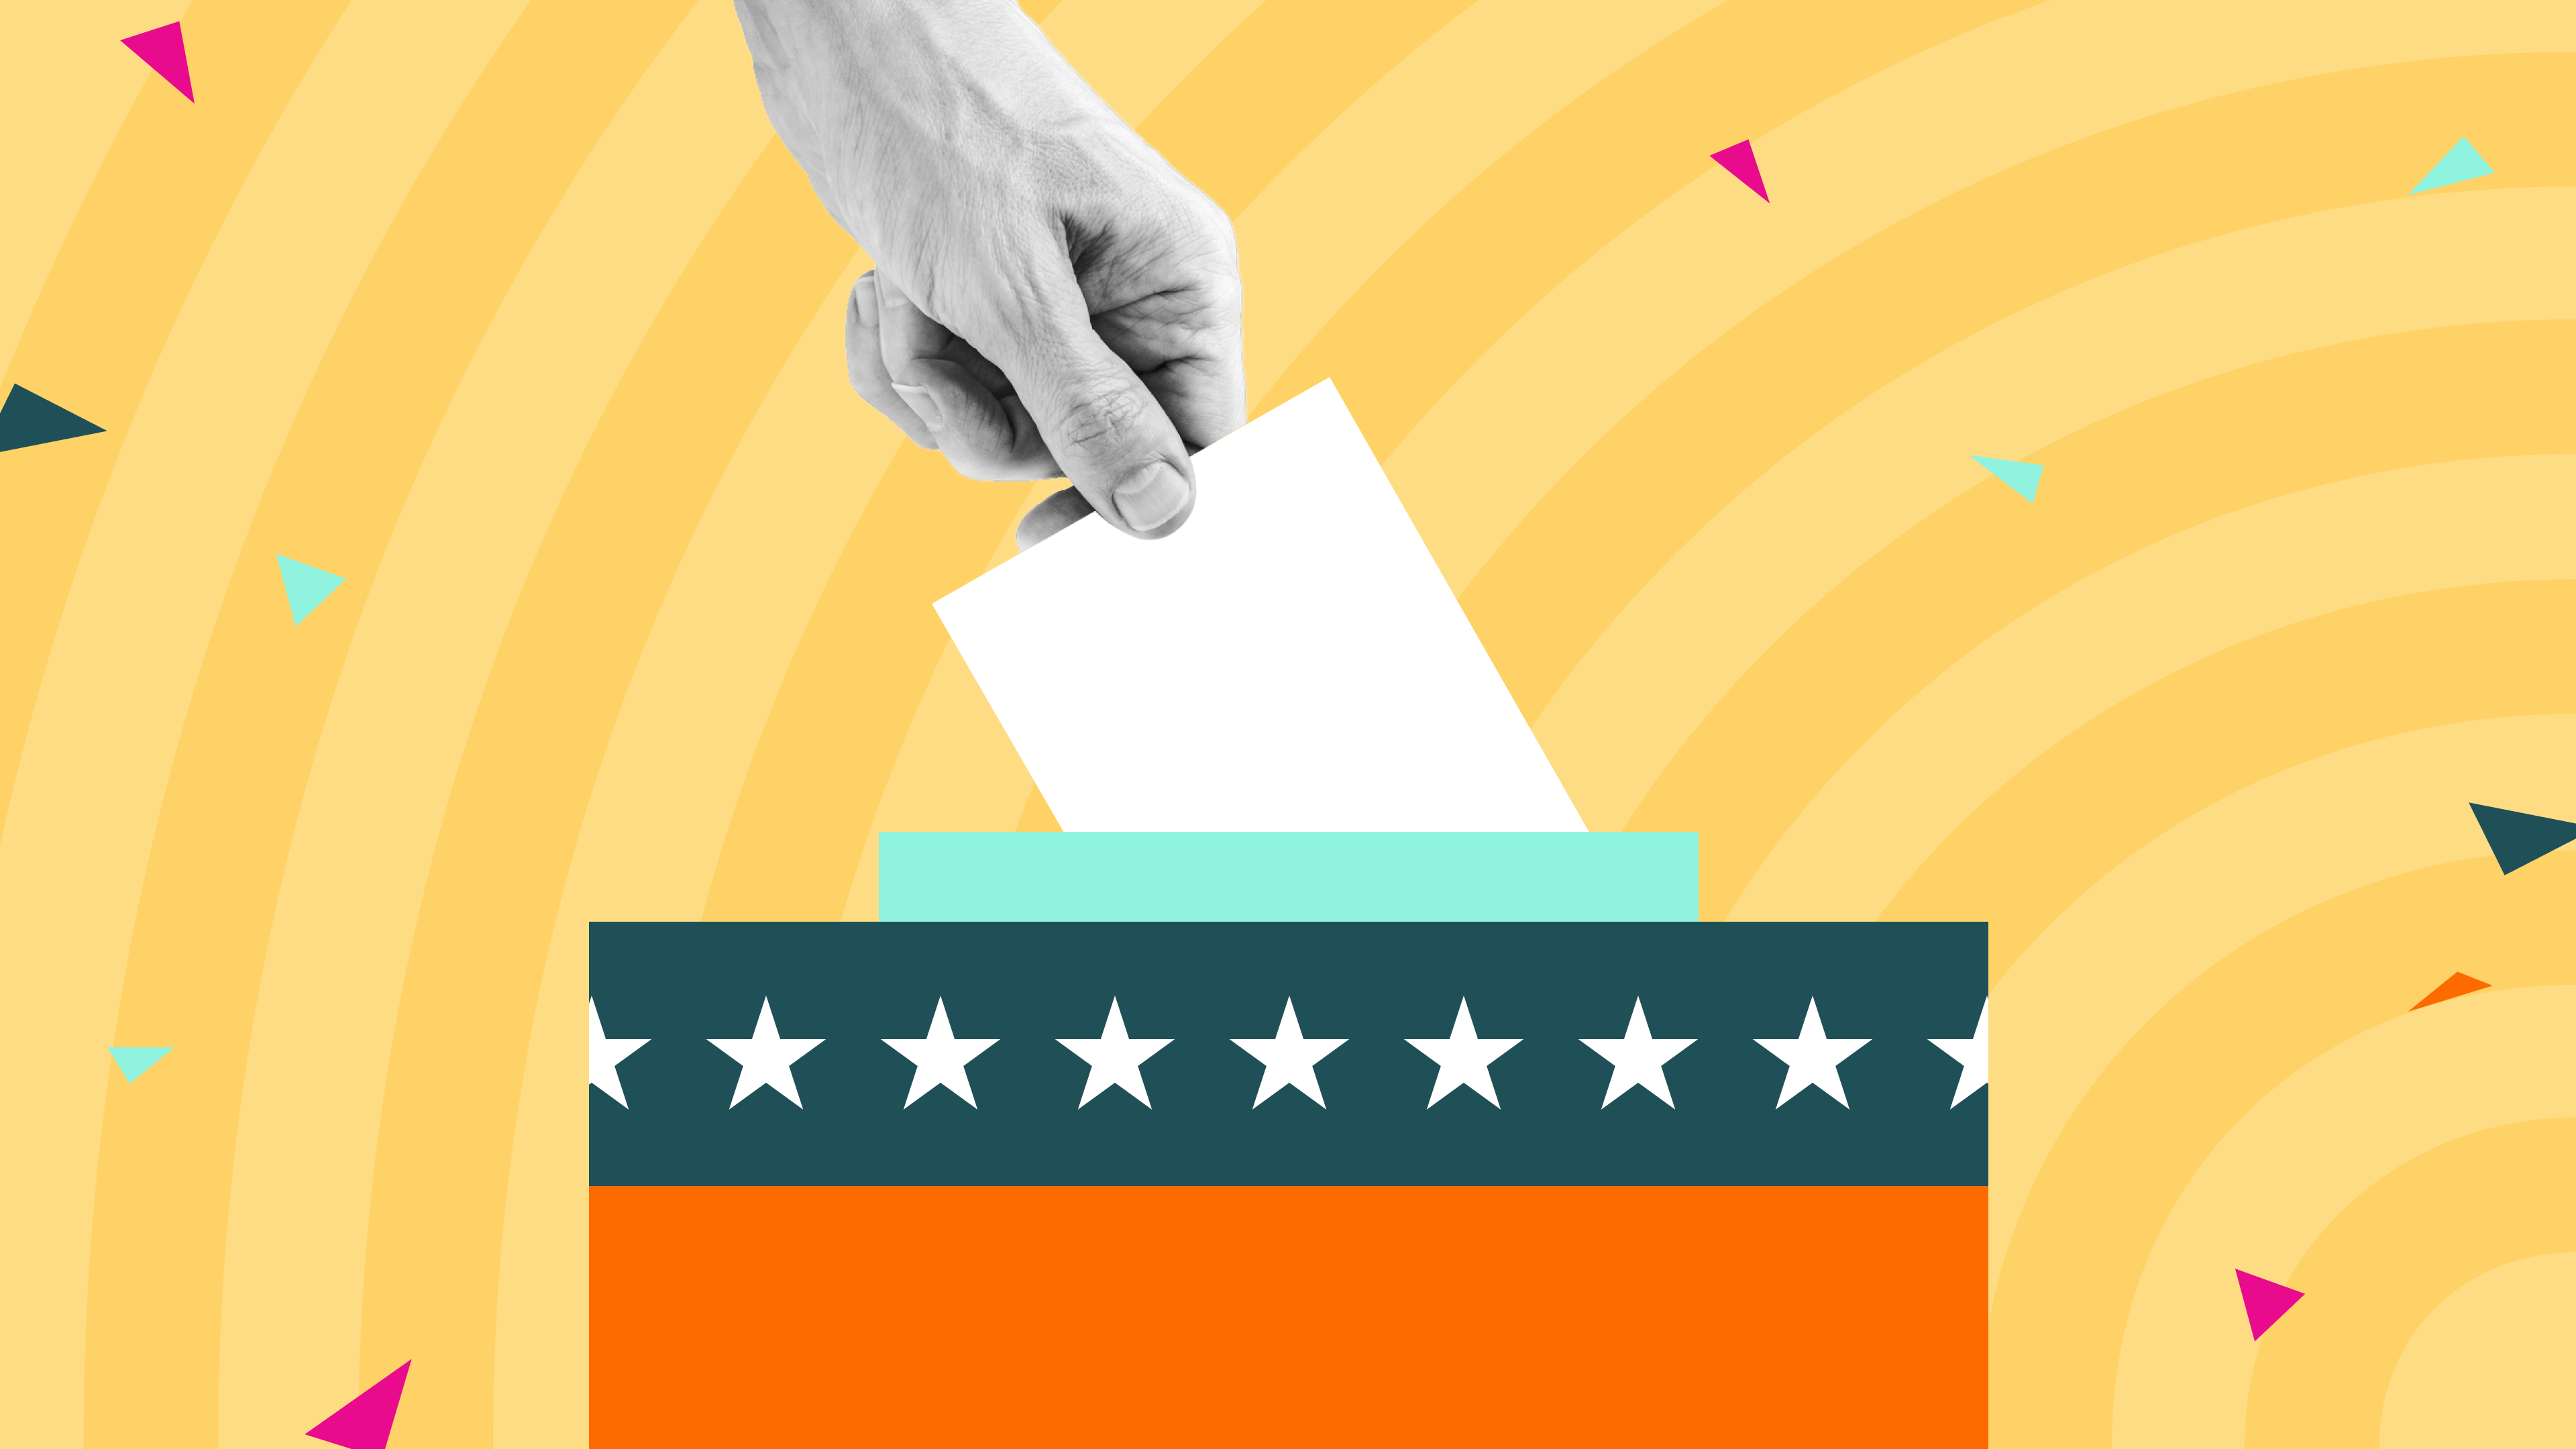 A graphic illustration showing a hand inserting a ballot into a box